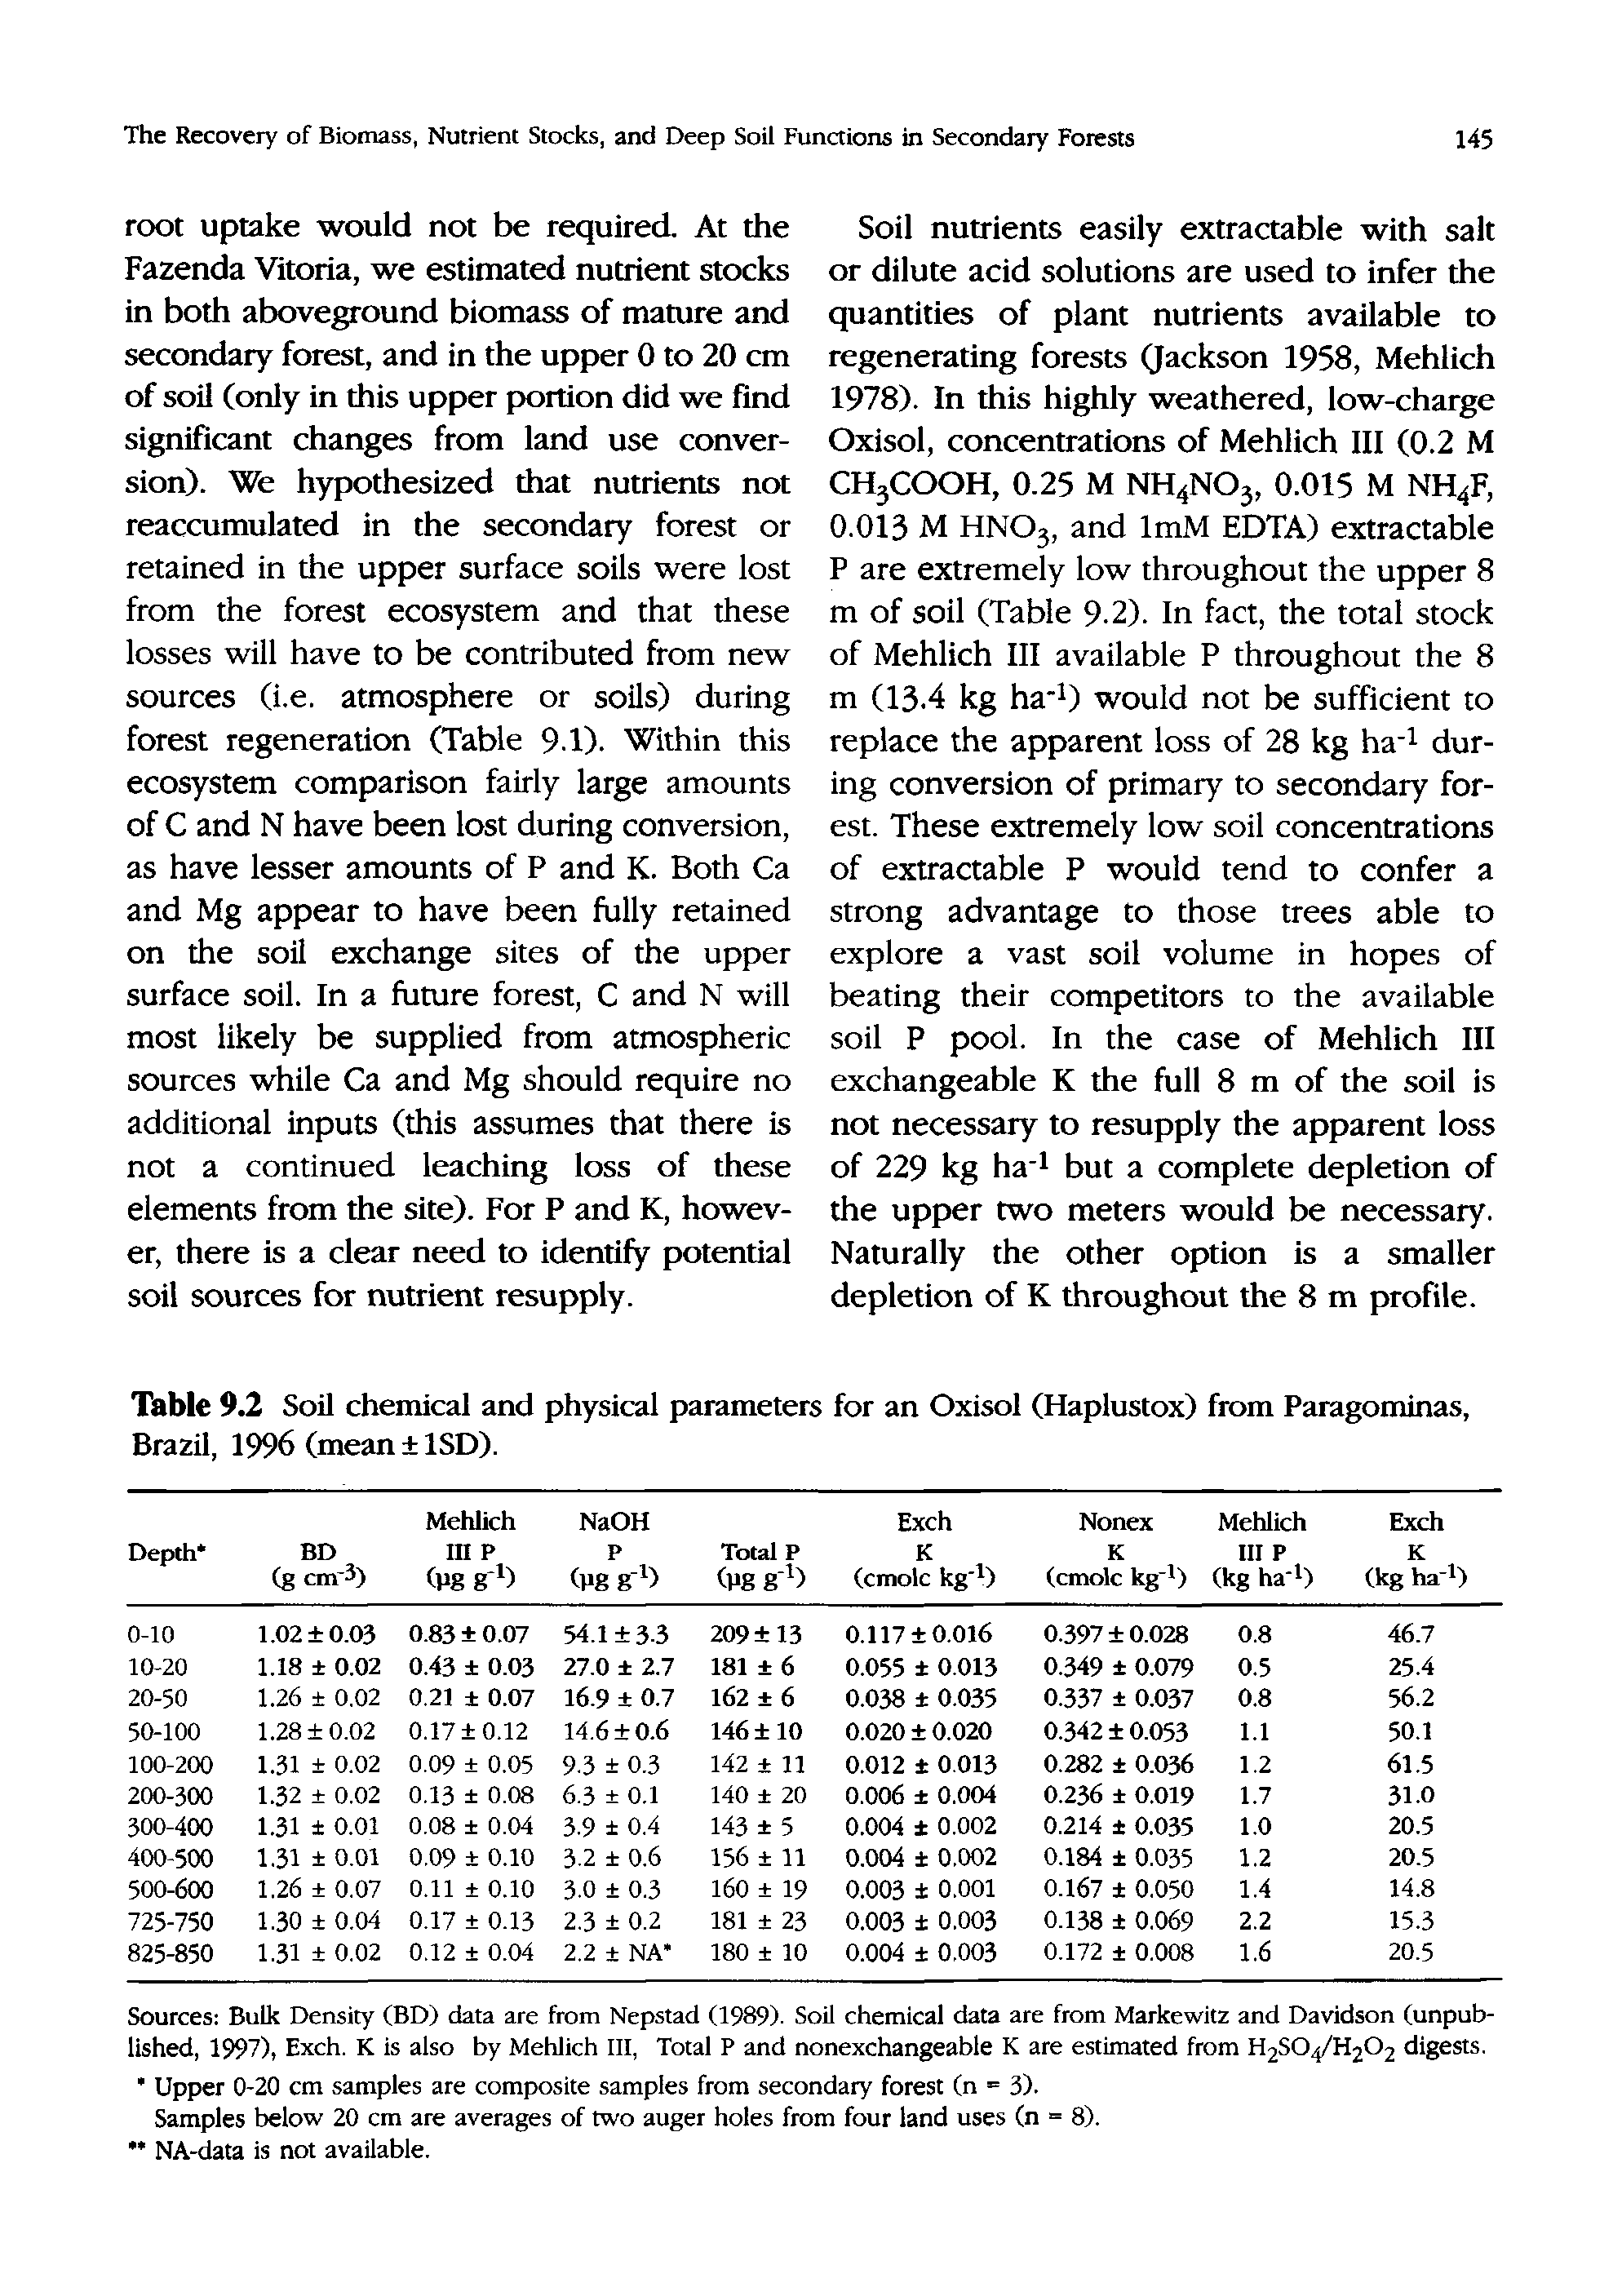 Table 9.2 Soil chemical and physical parameters for an Oxisol (Haplustox) from Paragominas, Brazil, 1996 (mean ISD).